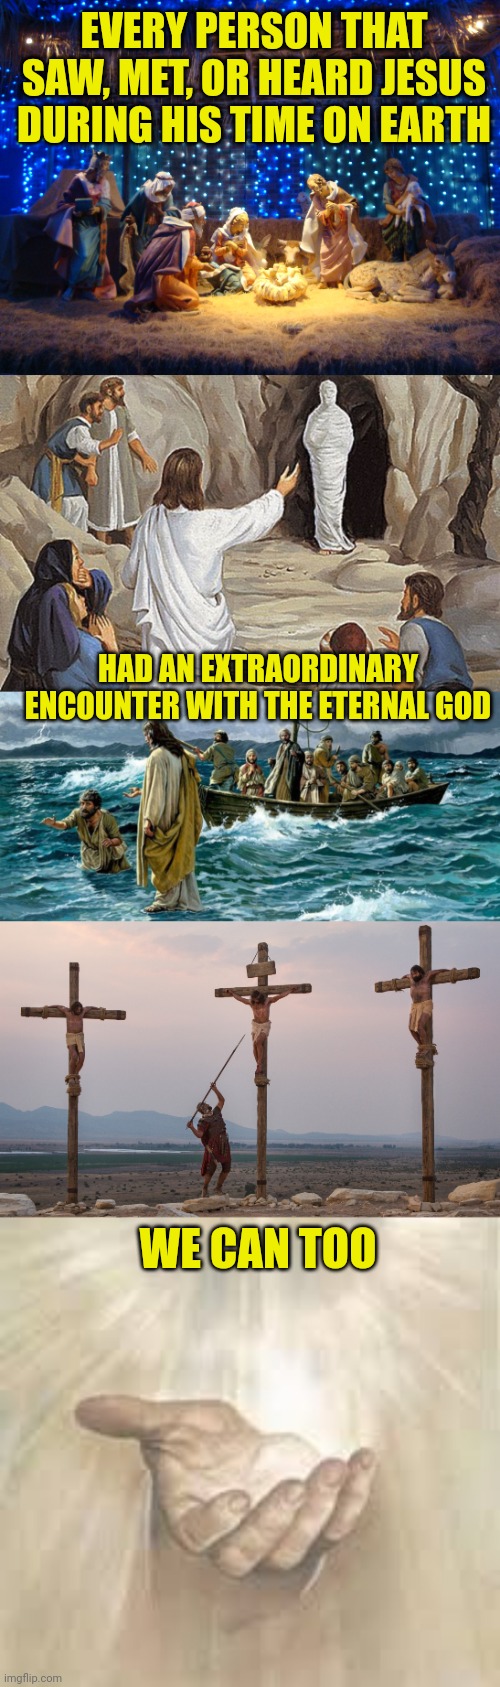 EVERY PERSON THAT SAW, MET, OR HEARD JESUS DURING HIS TIME ON EARTH; HAD AN EXTRAORDINARY ENCOUNTER WITH THE ETERNAL GOD; WE CAN TOO | image tagged in nativity scene,raising lazarus,jesus walking on the water,jesus on the cross,jesus beckoning | made w/ Imgflip meme maker